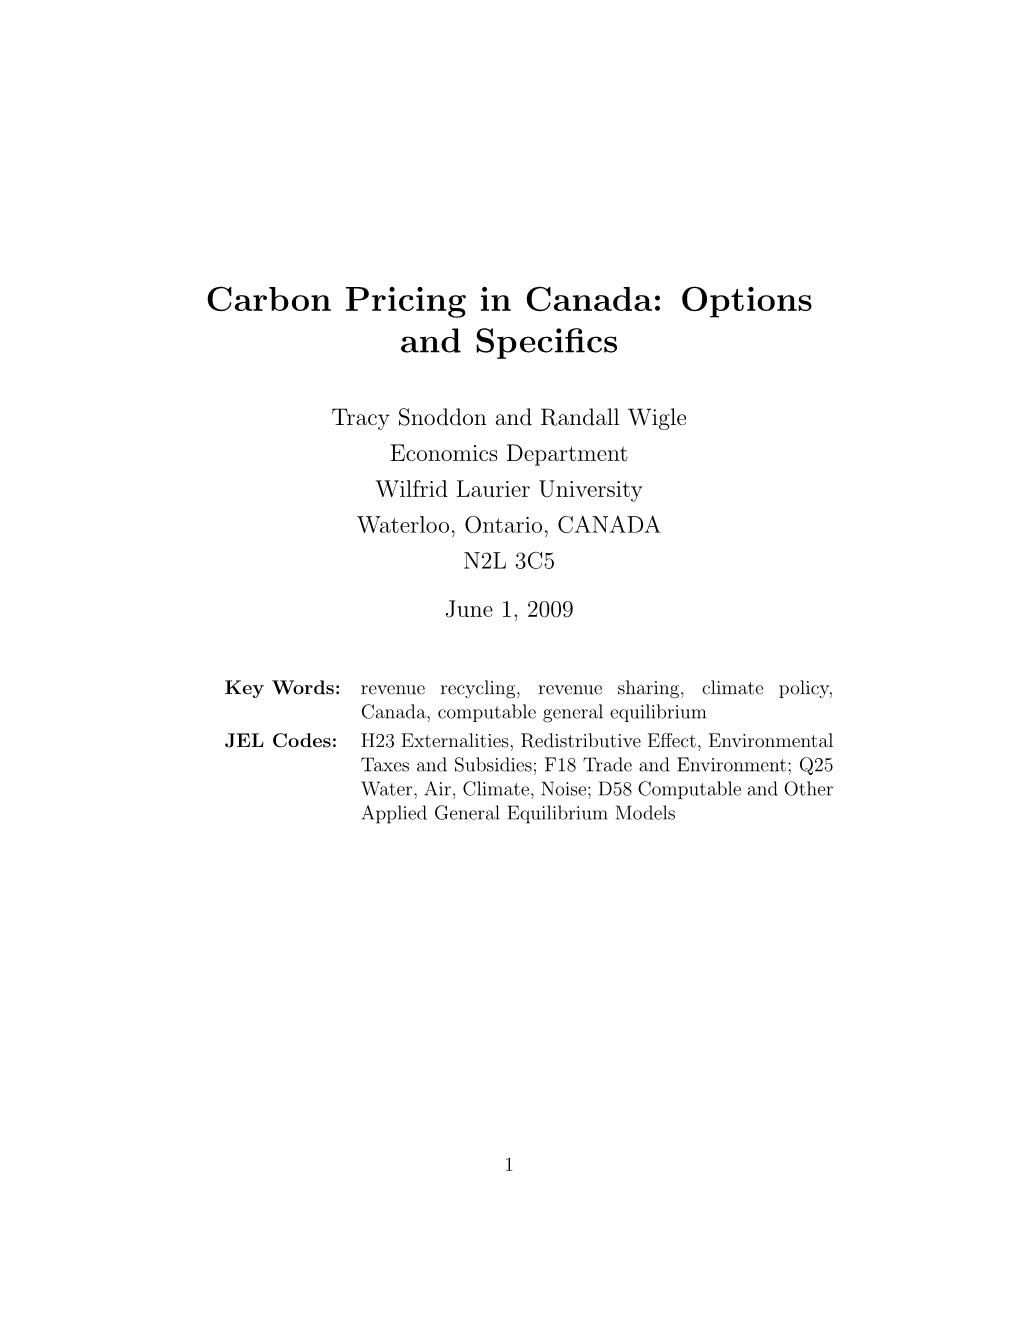 Carbon Pricing in Canada: Options and Speciﬁcs